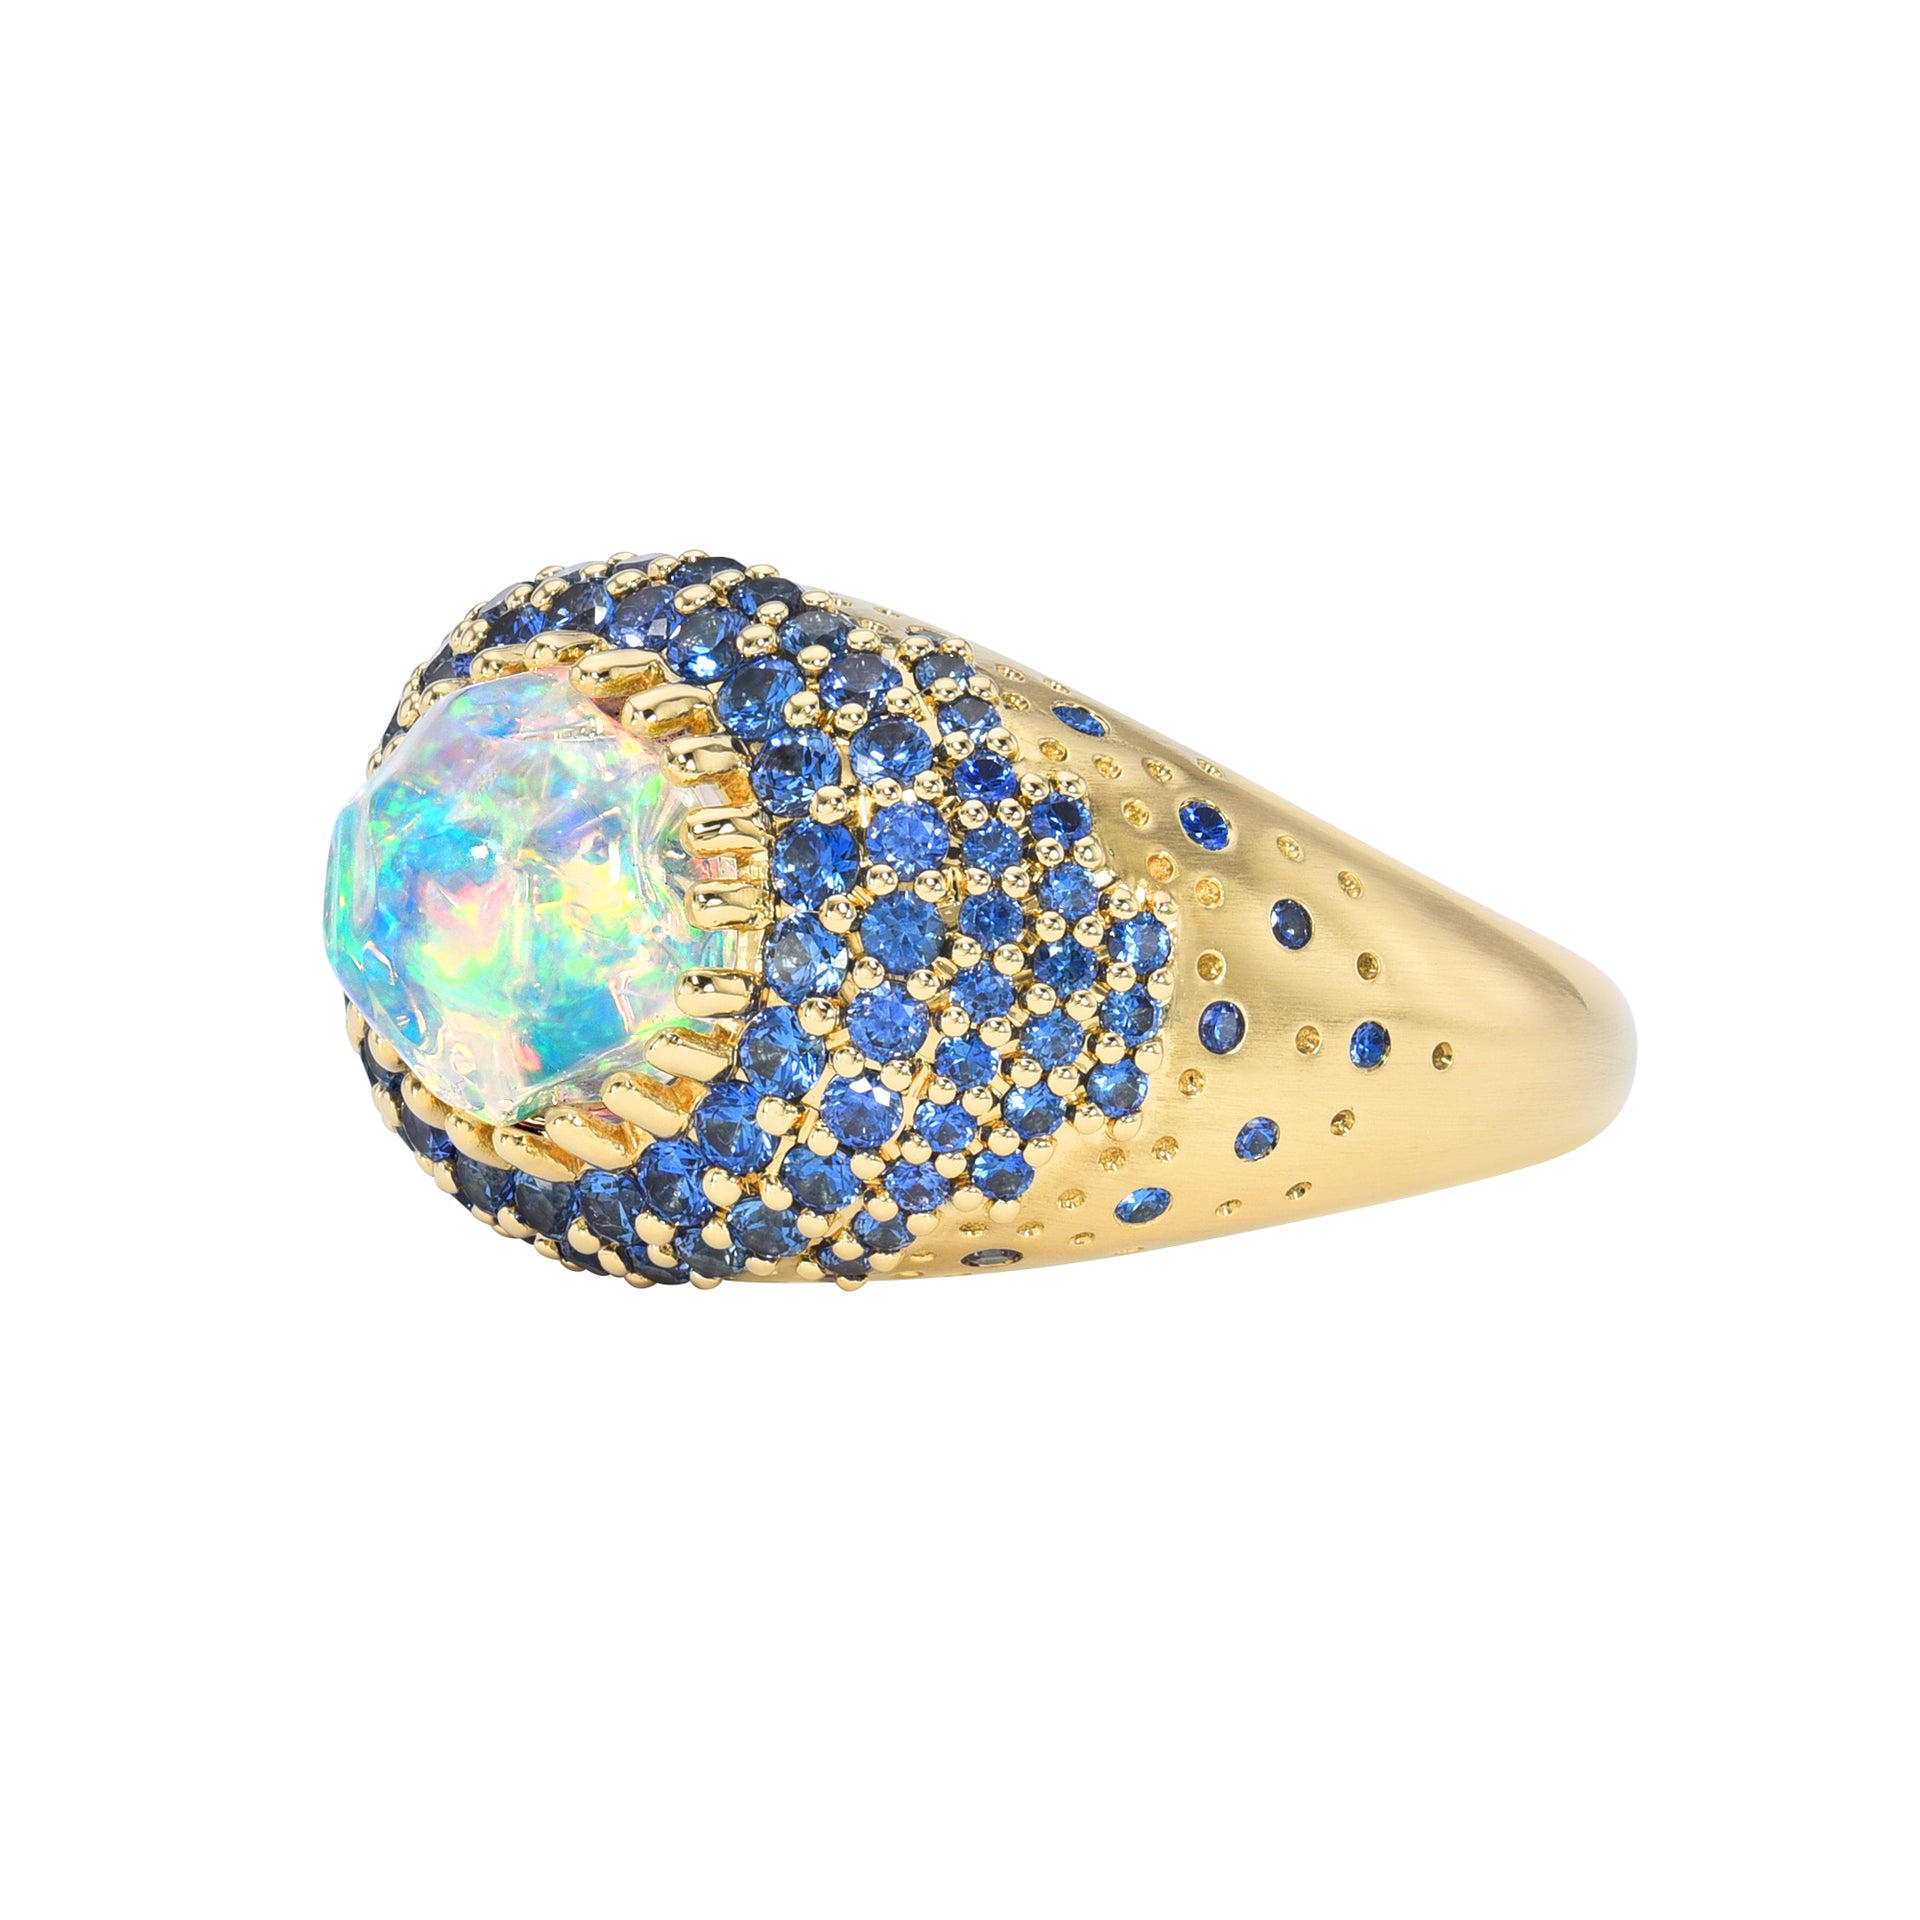 "Frozen" Fire Opal Ring - Meredith Young